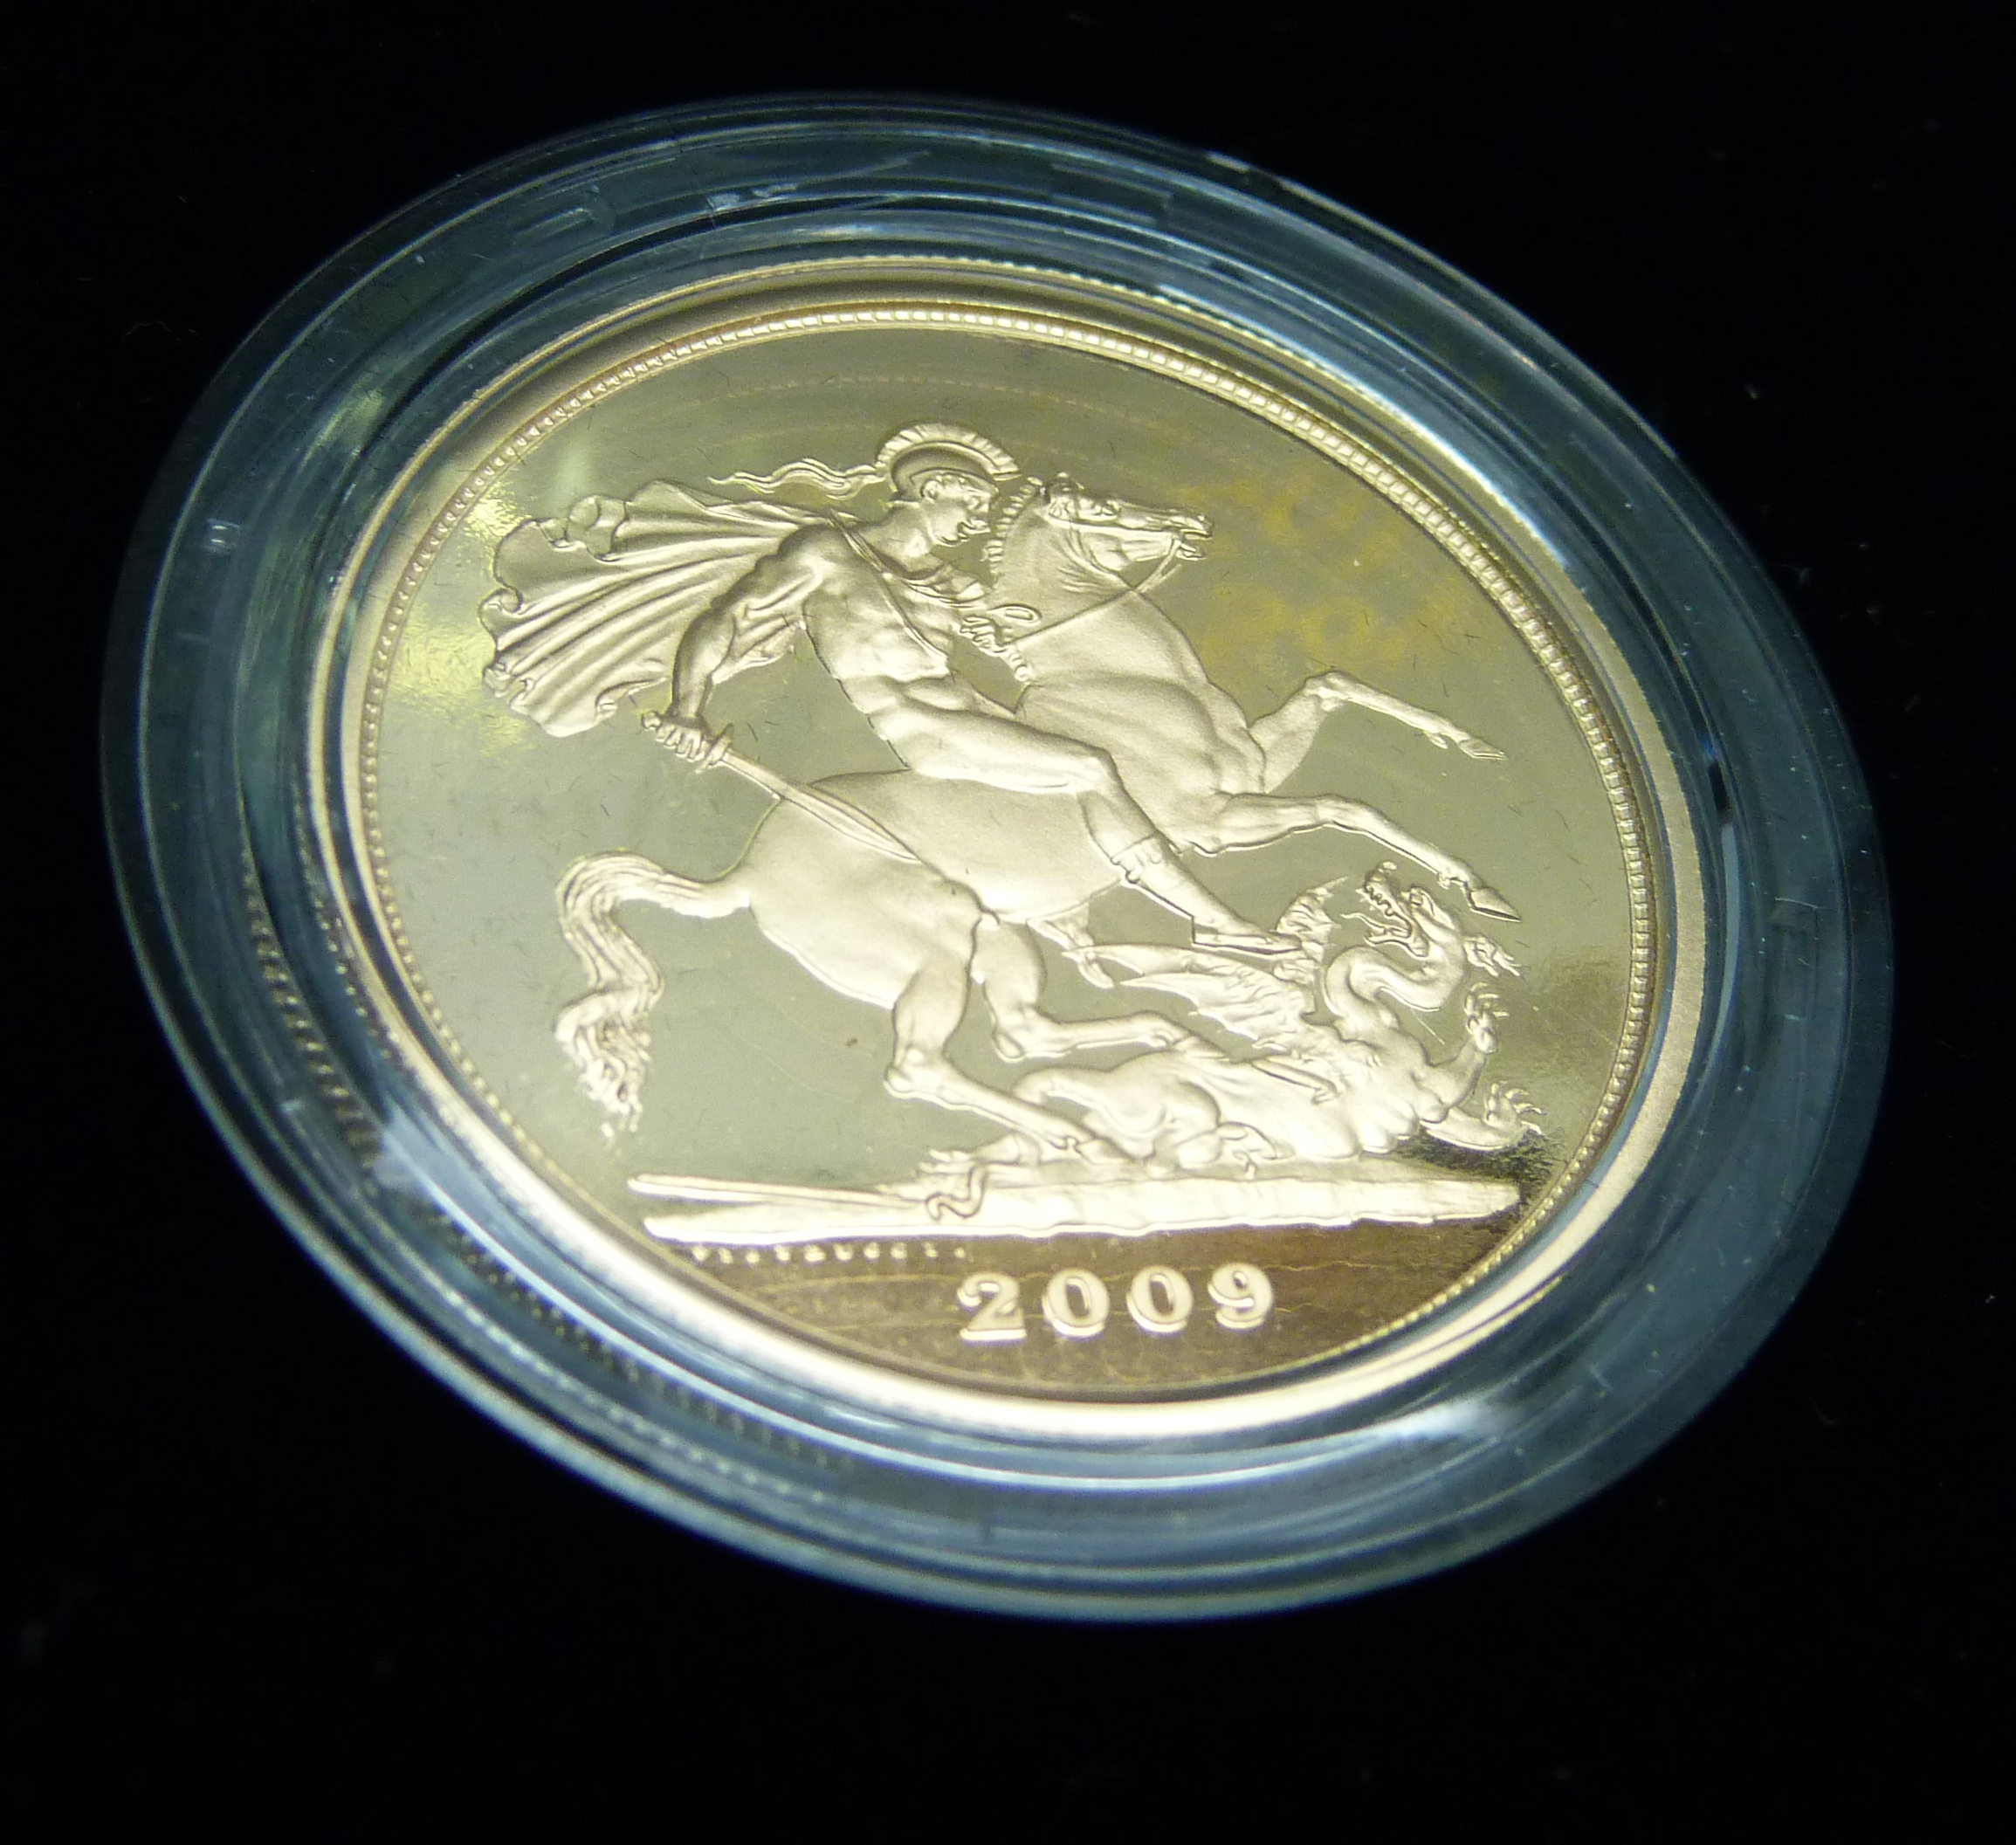 The Royal Mint 2009 UK gold proof five-coin collection, no. 1443 - Image 3 of 5